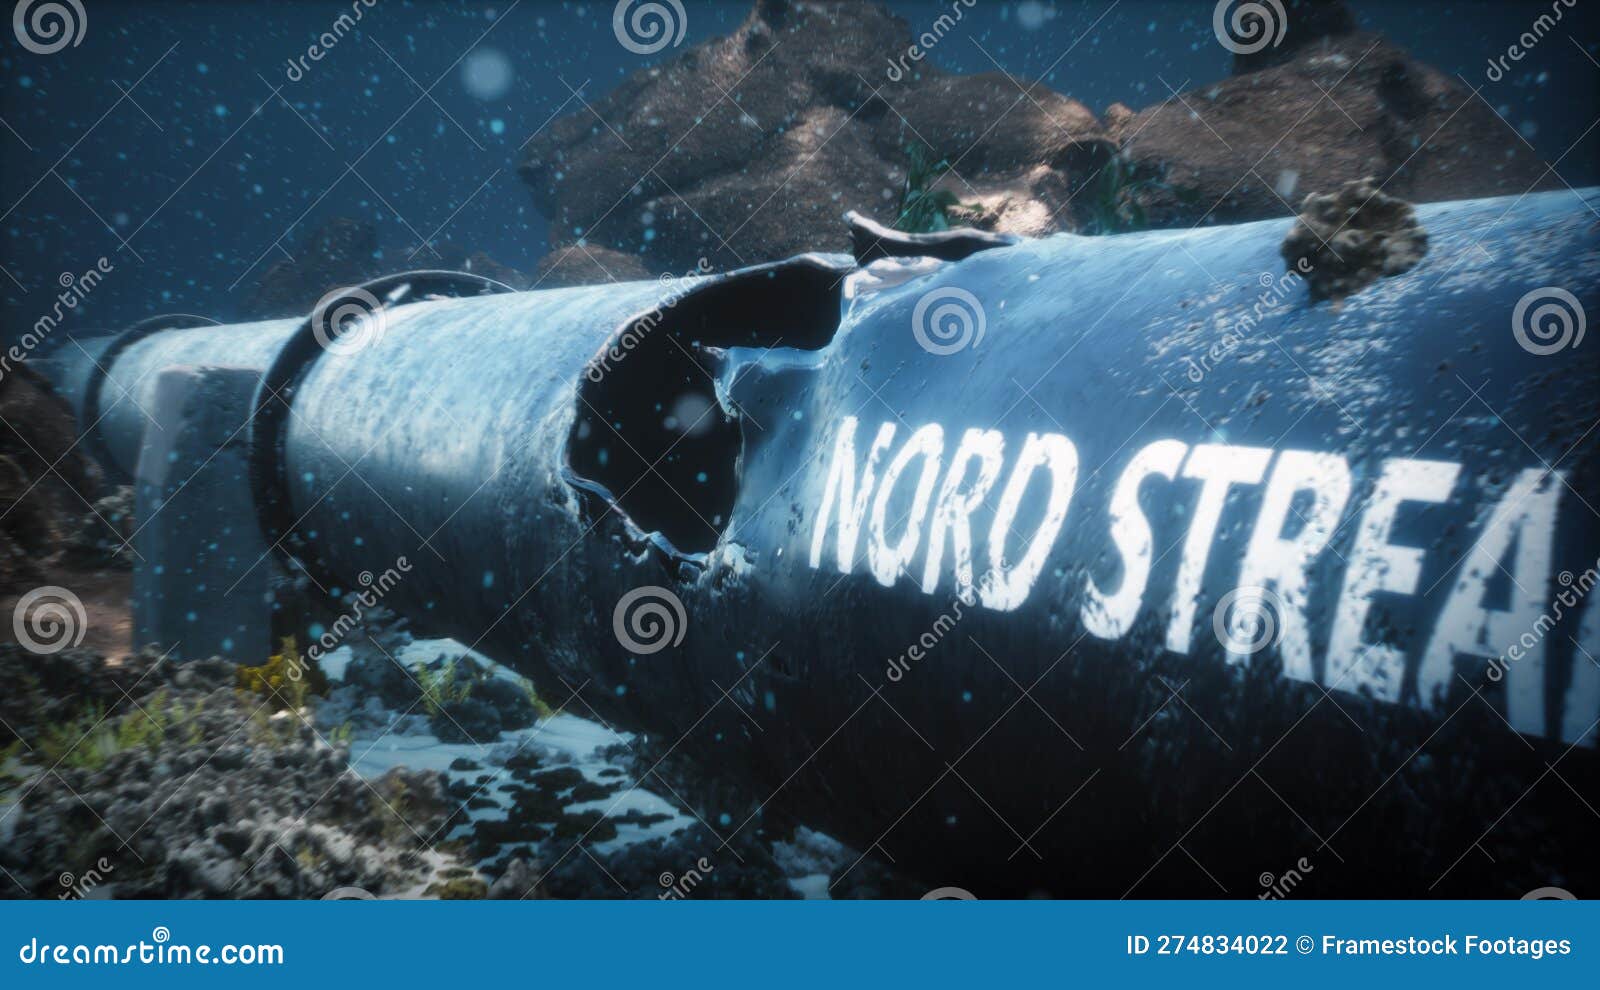 3d render of a damaged pipe nord stream 2